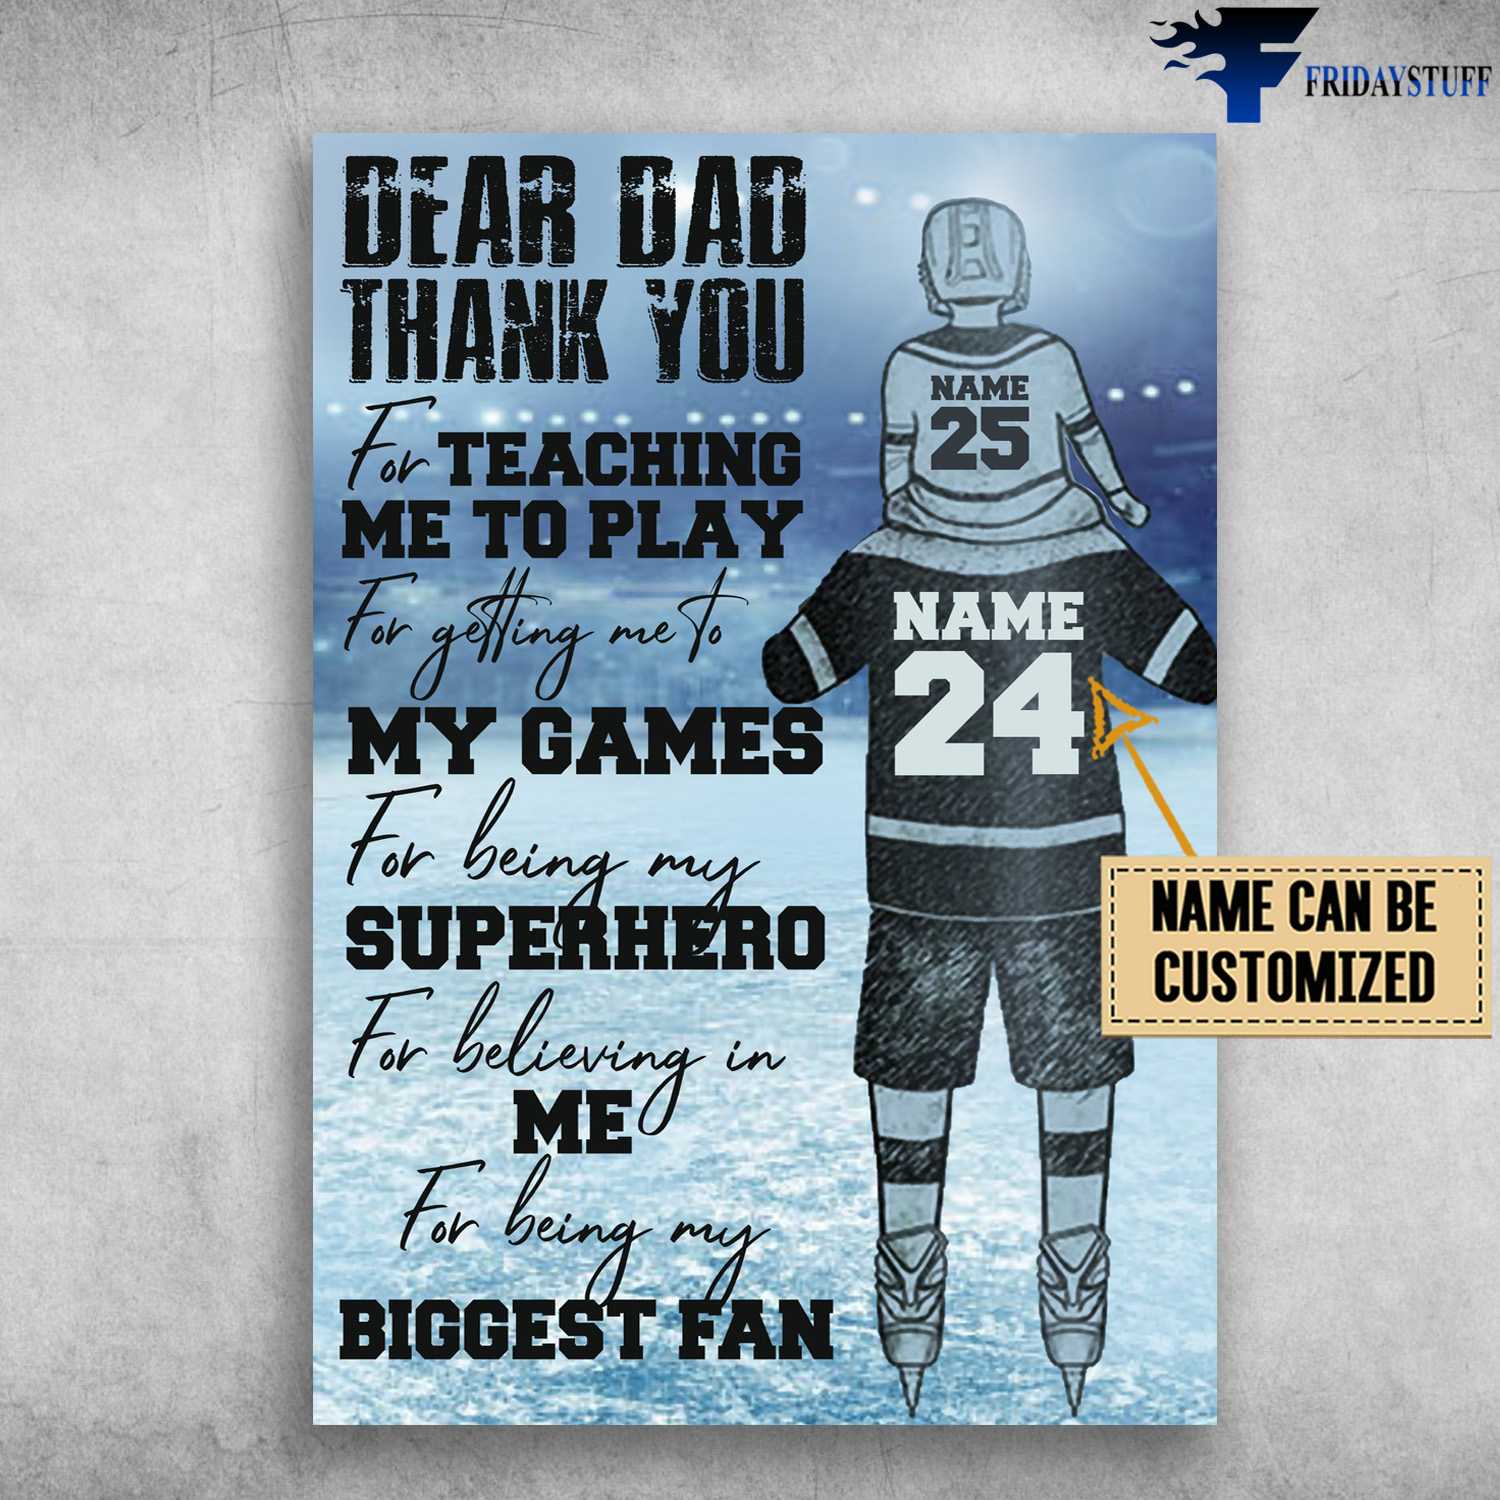 https://fridaystuff.com/wp-content/uploads/2022/01/Hockey-Lover-Hockey-Dad-Dear-Dad-Thank-You-For-Teaching-Me-To-Play-For-Getting-Me-To-My-Games-For-Being-My-Superhero.jpg